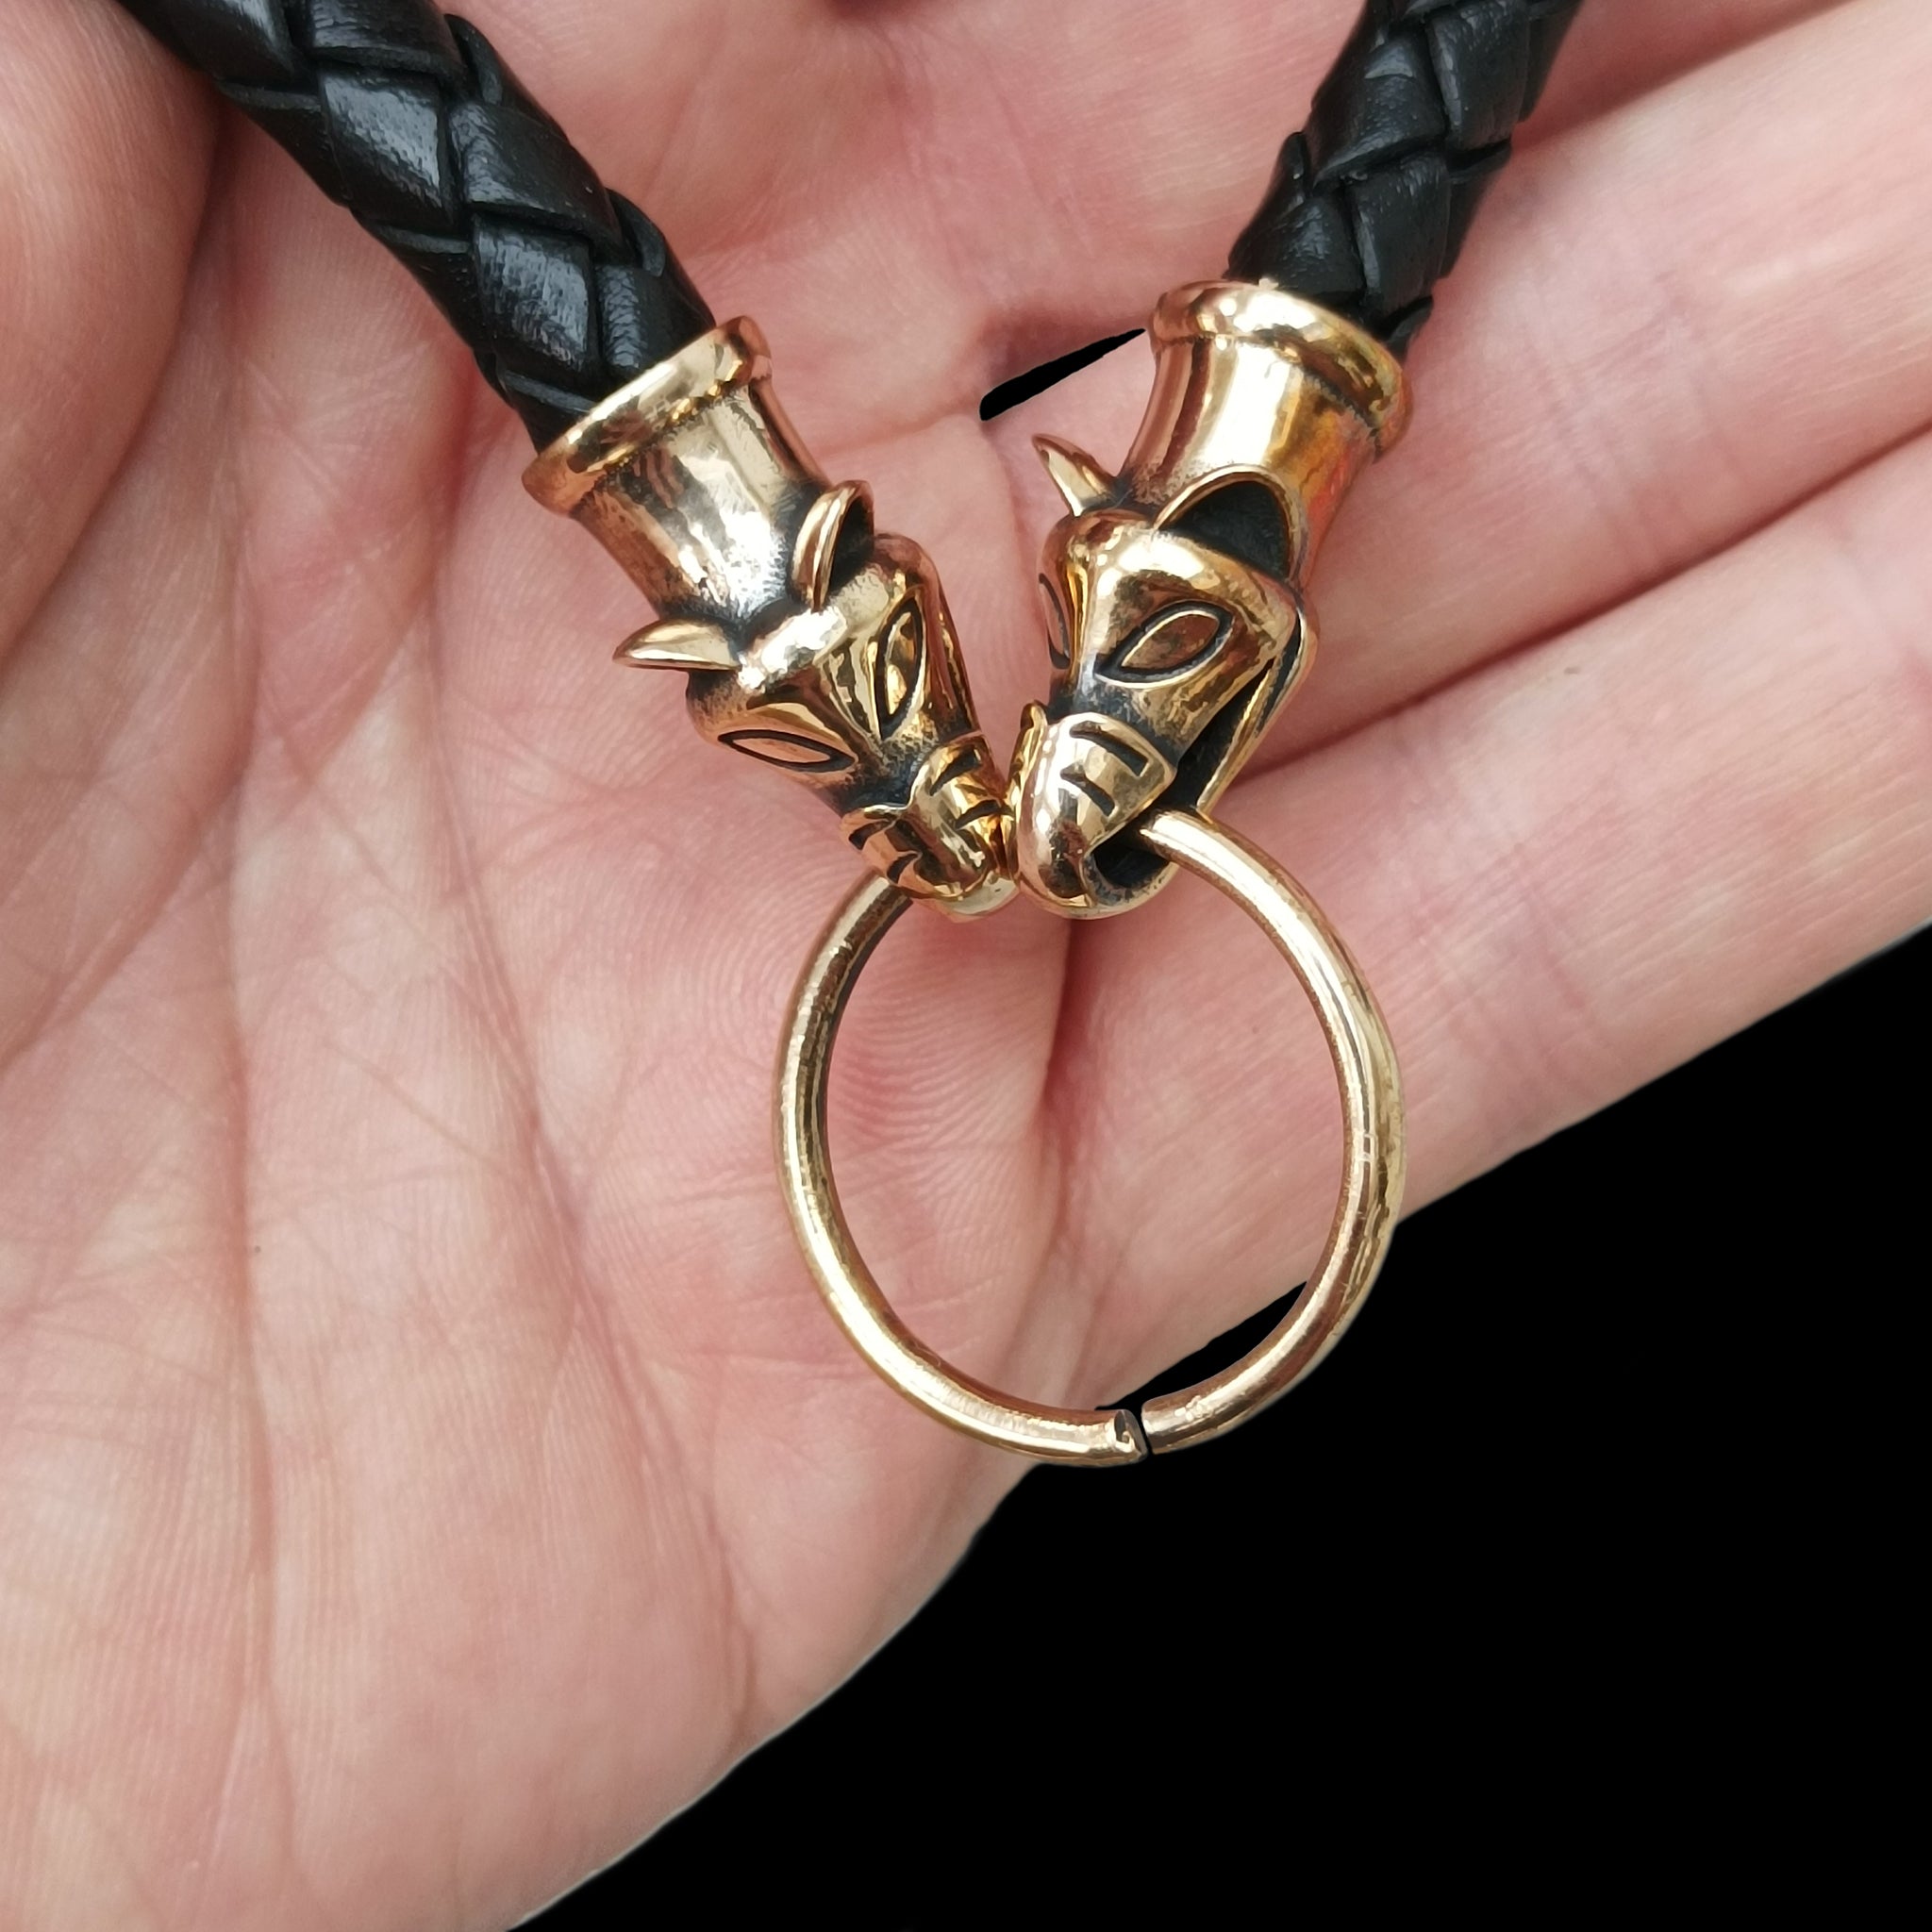 8mm Width Braided Leather Necklace with Bronze Icelandic Wolf Heads and Split Ring in Hand